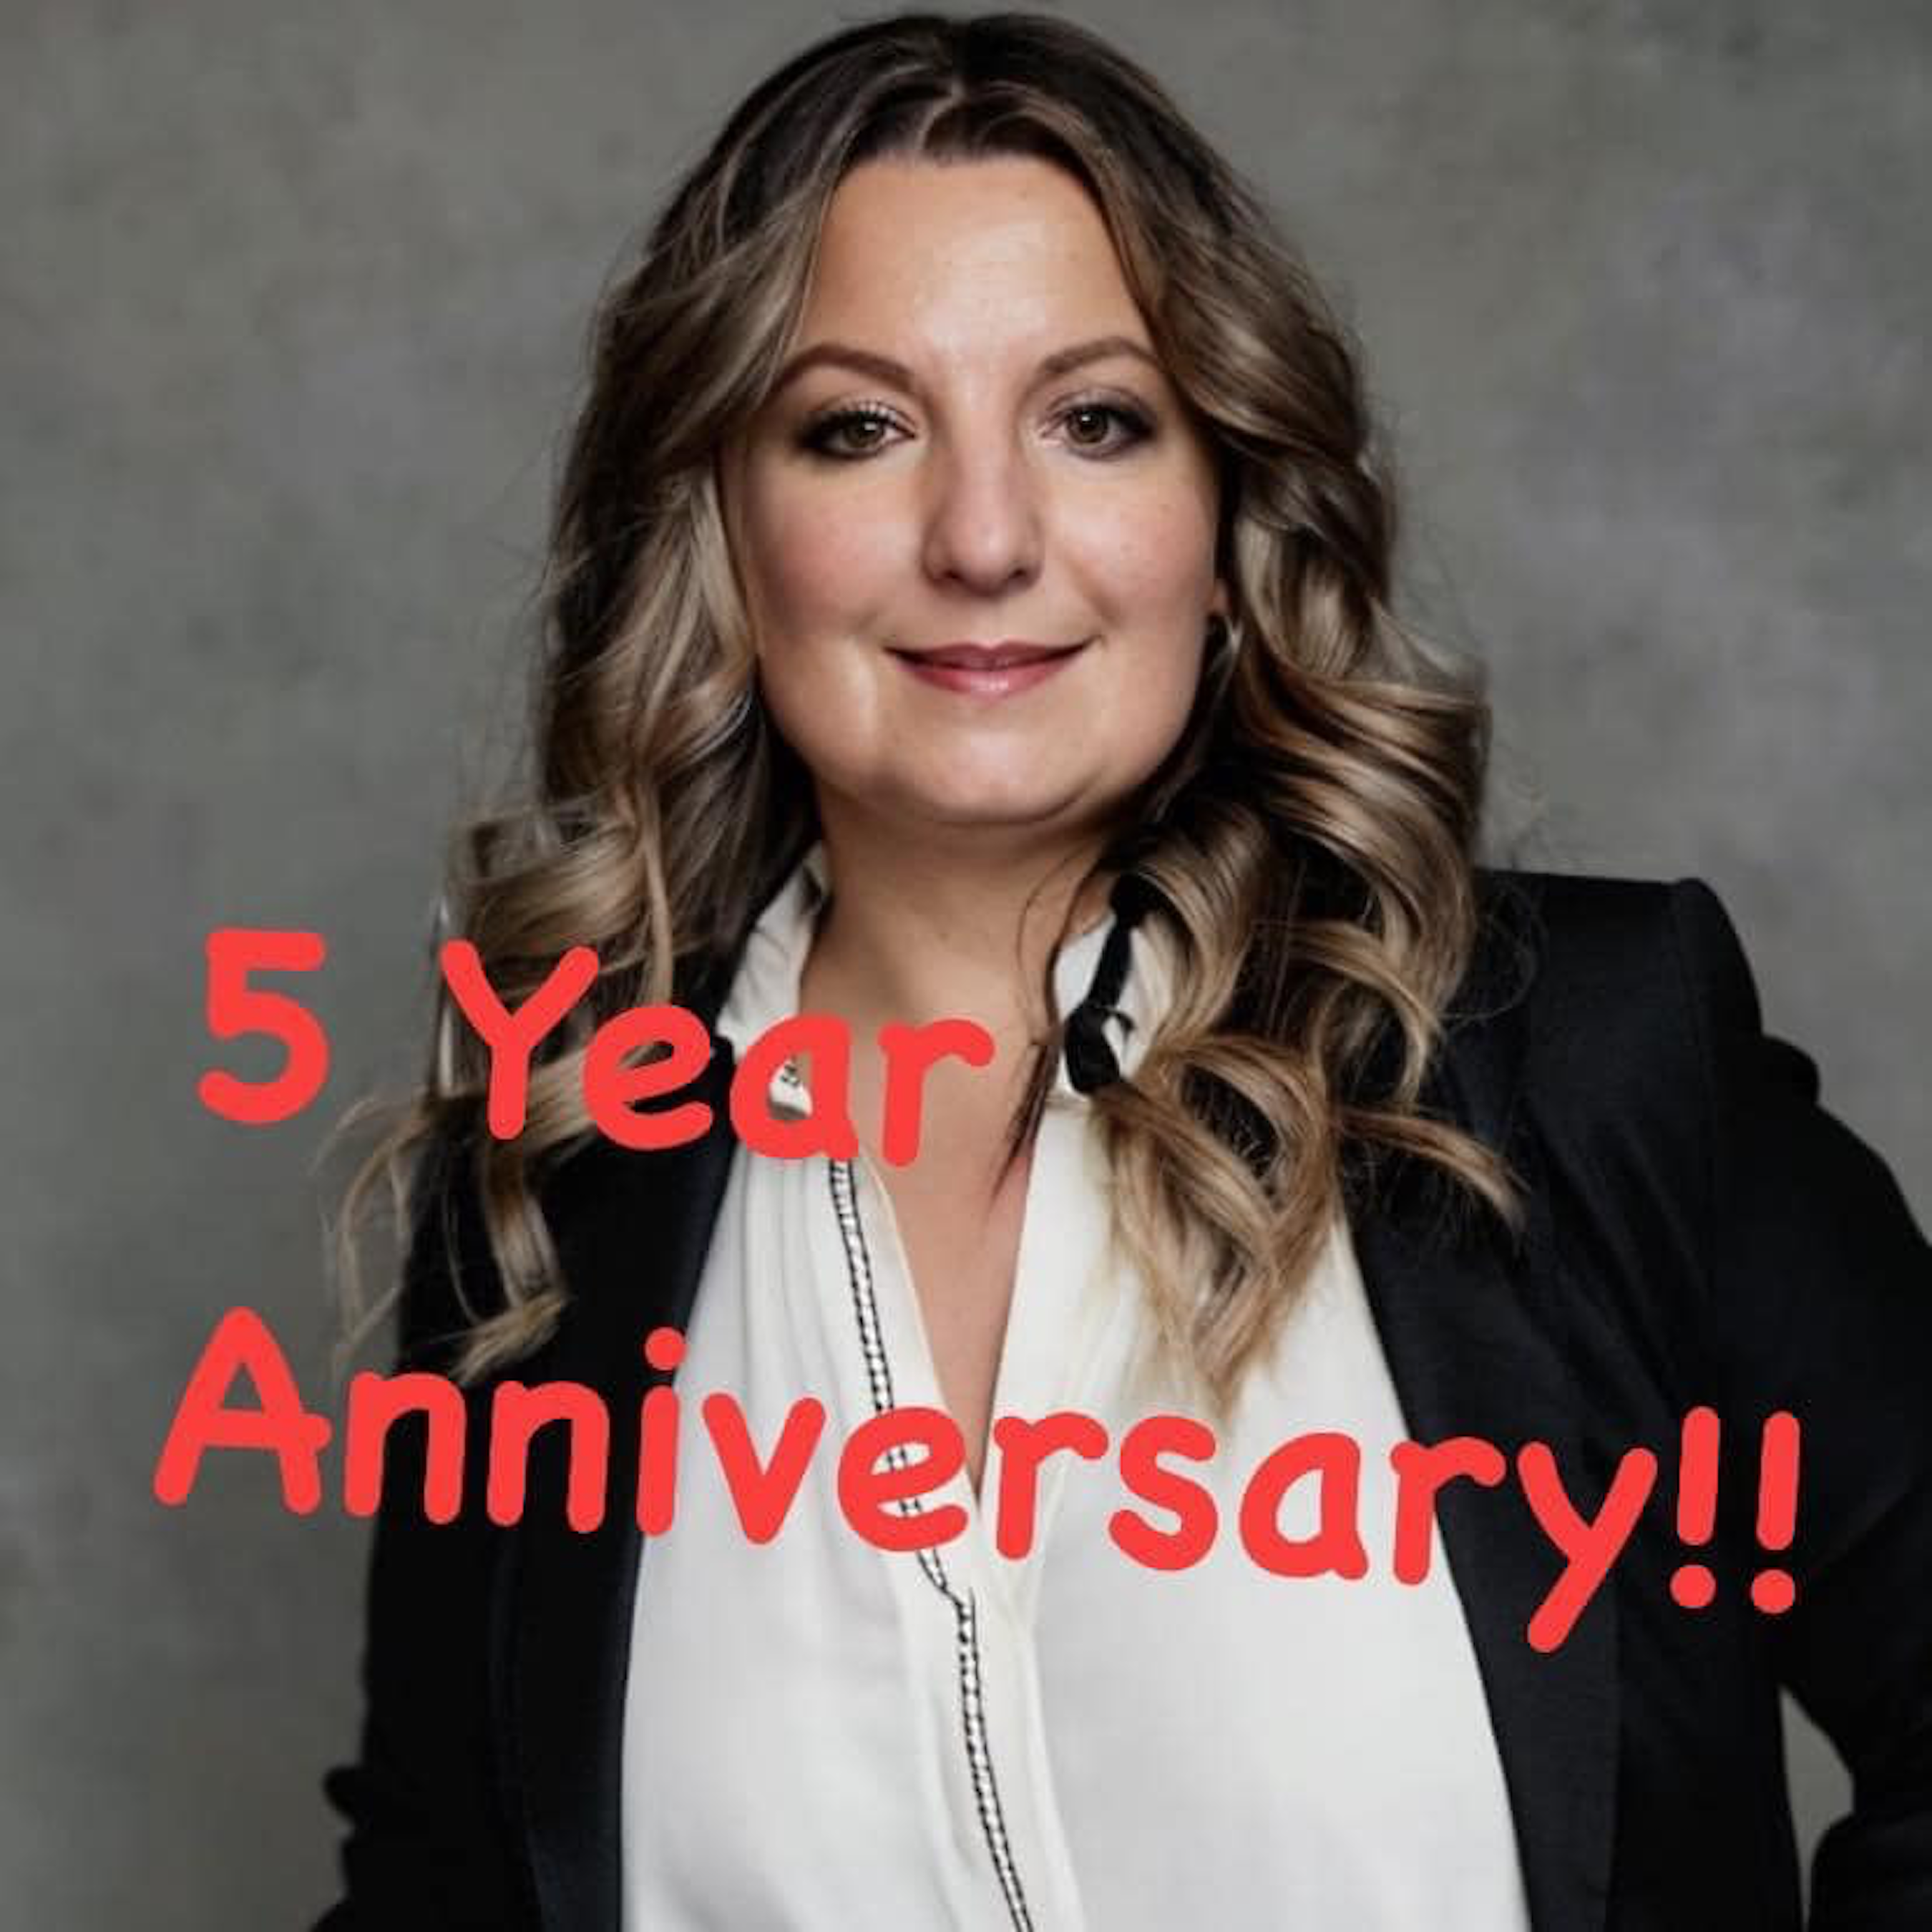 This month marks five years since I opened my office! Thank you to this amazing community, my customers, friends, and family! Looking forward to many more!